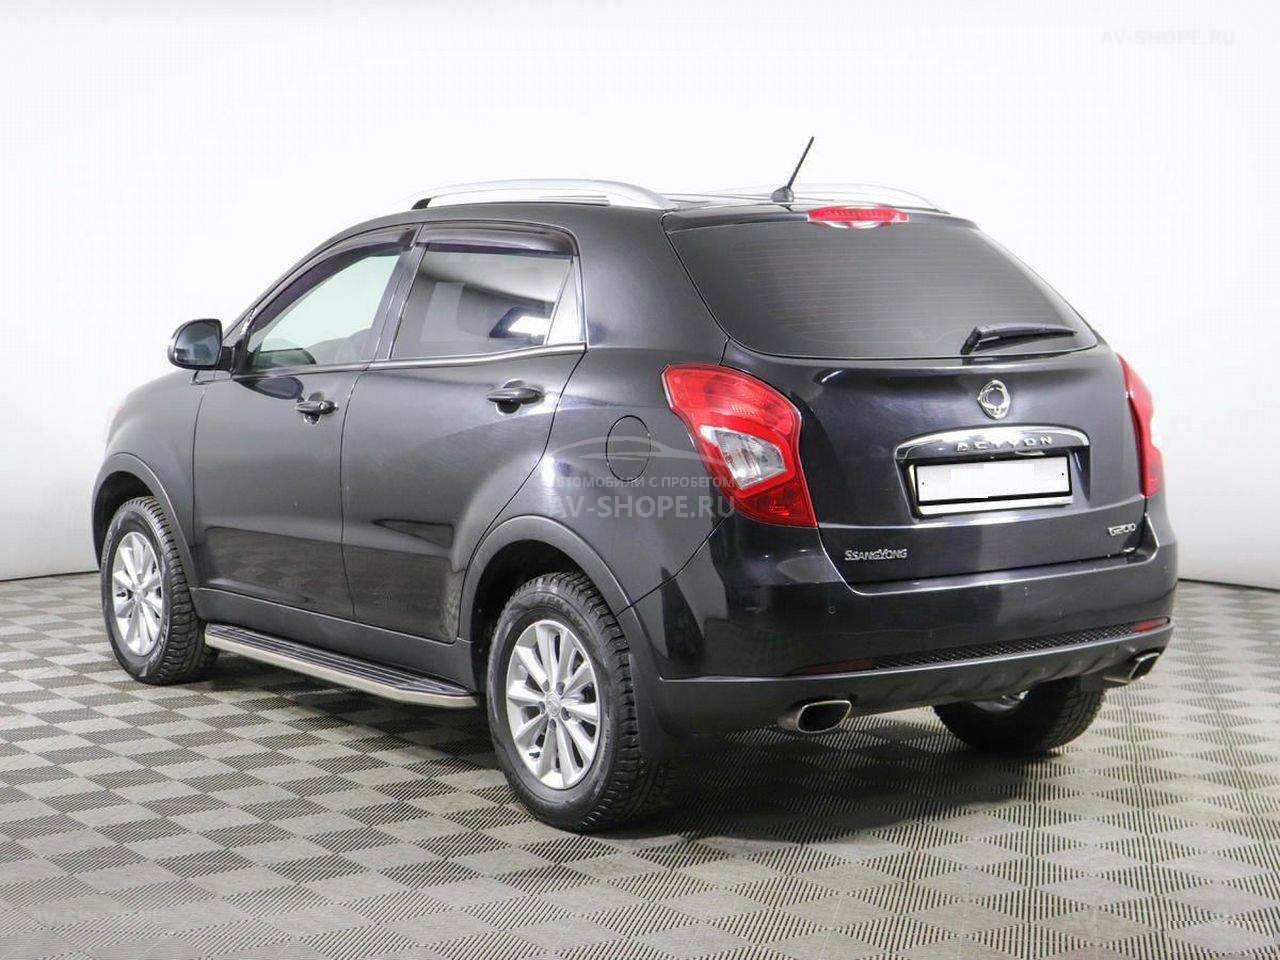 Ssangyong actyon 2014 года. SSANGYONG Actyon 2014. Санг енг Актион 2. SSANGYONG Actyon New 2. SSANGYONG Actyon Actyon.